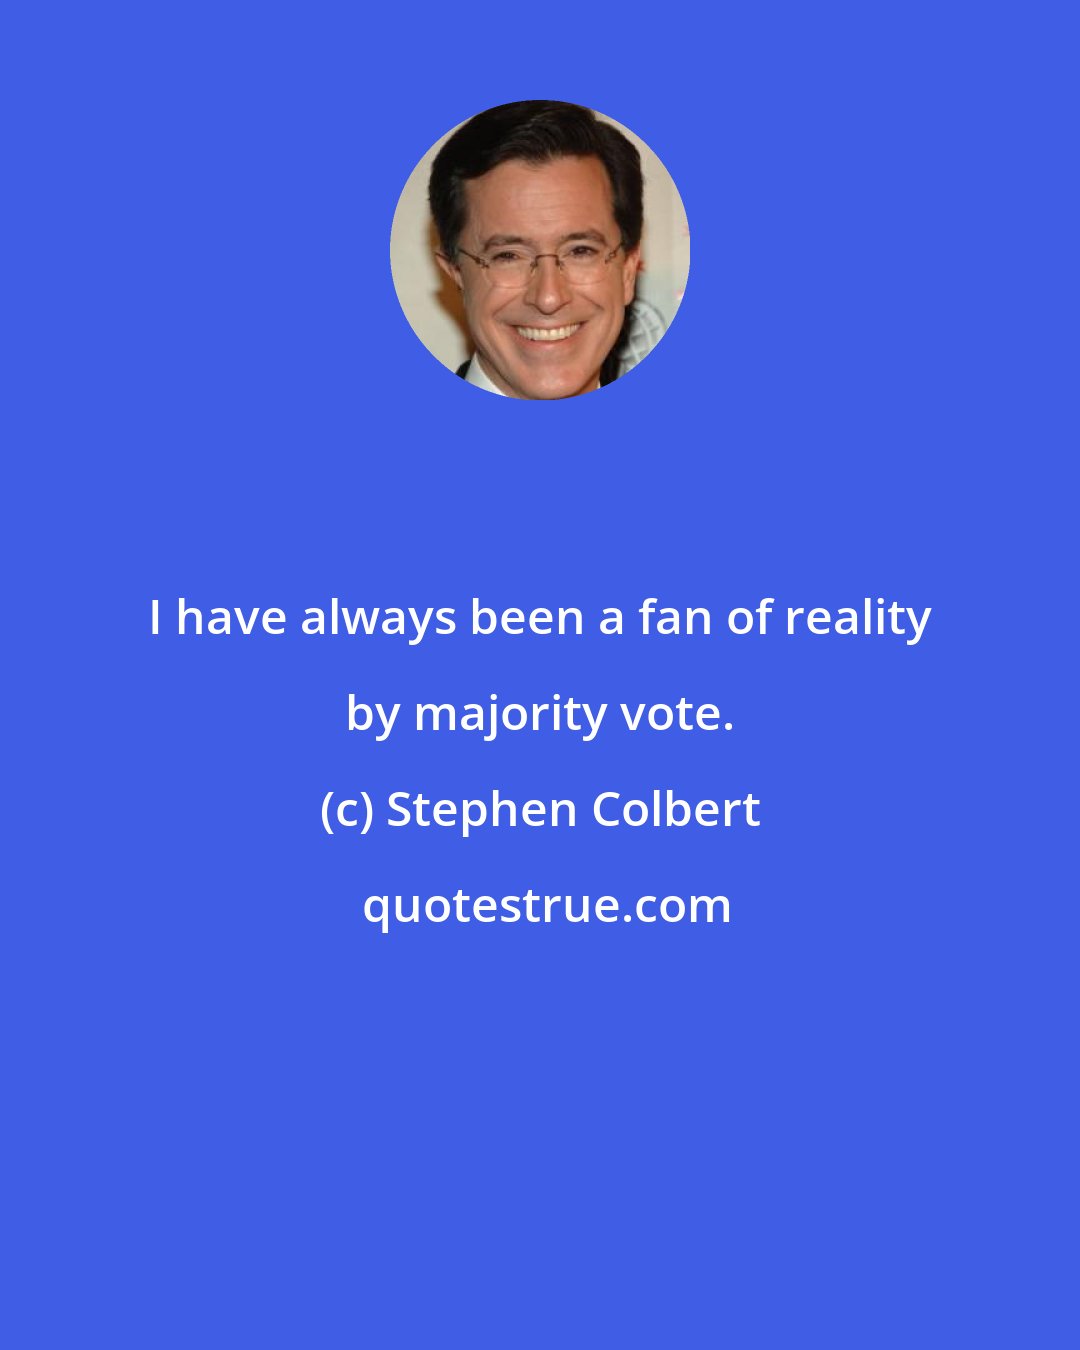 Stephen Colbert: I have always been a fan of reality by majority vote.